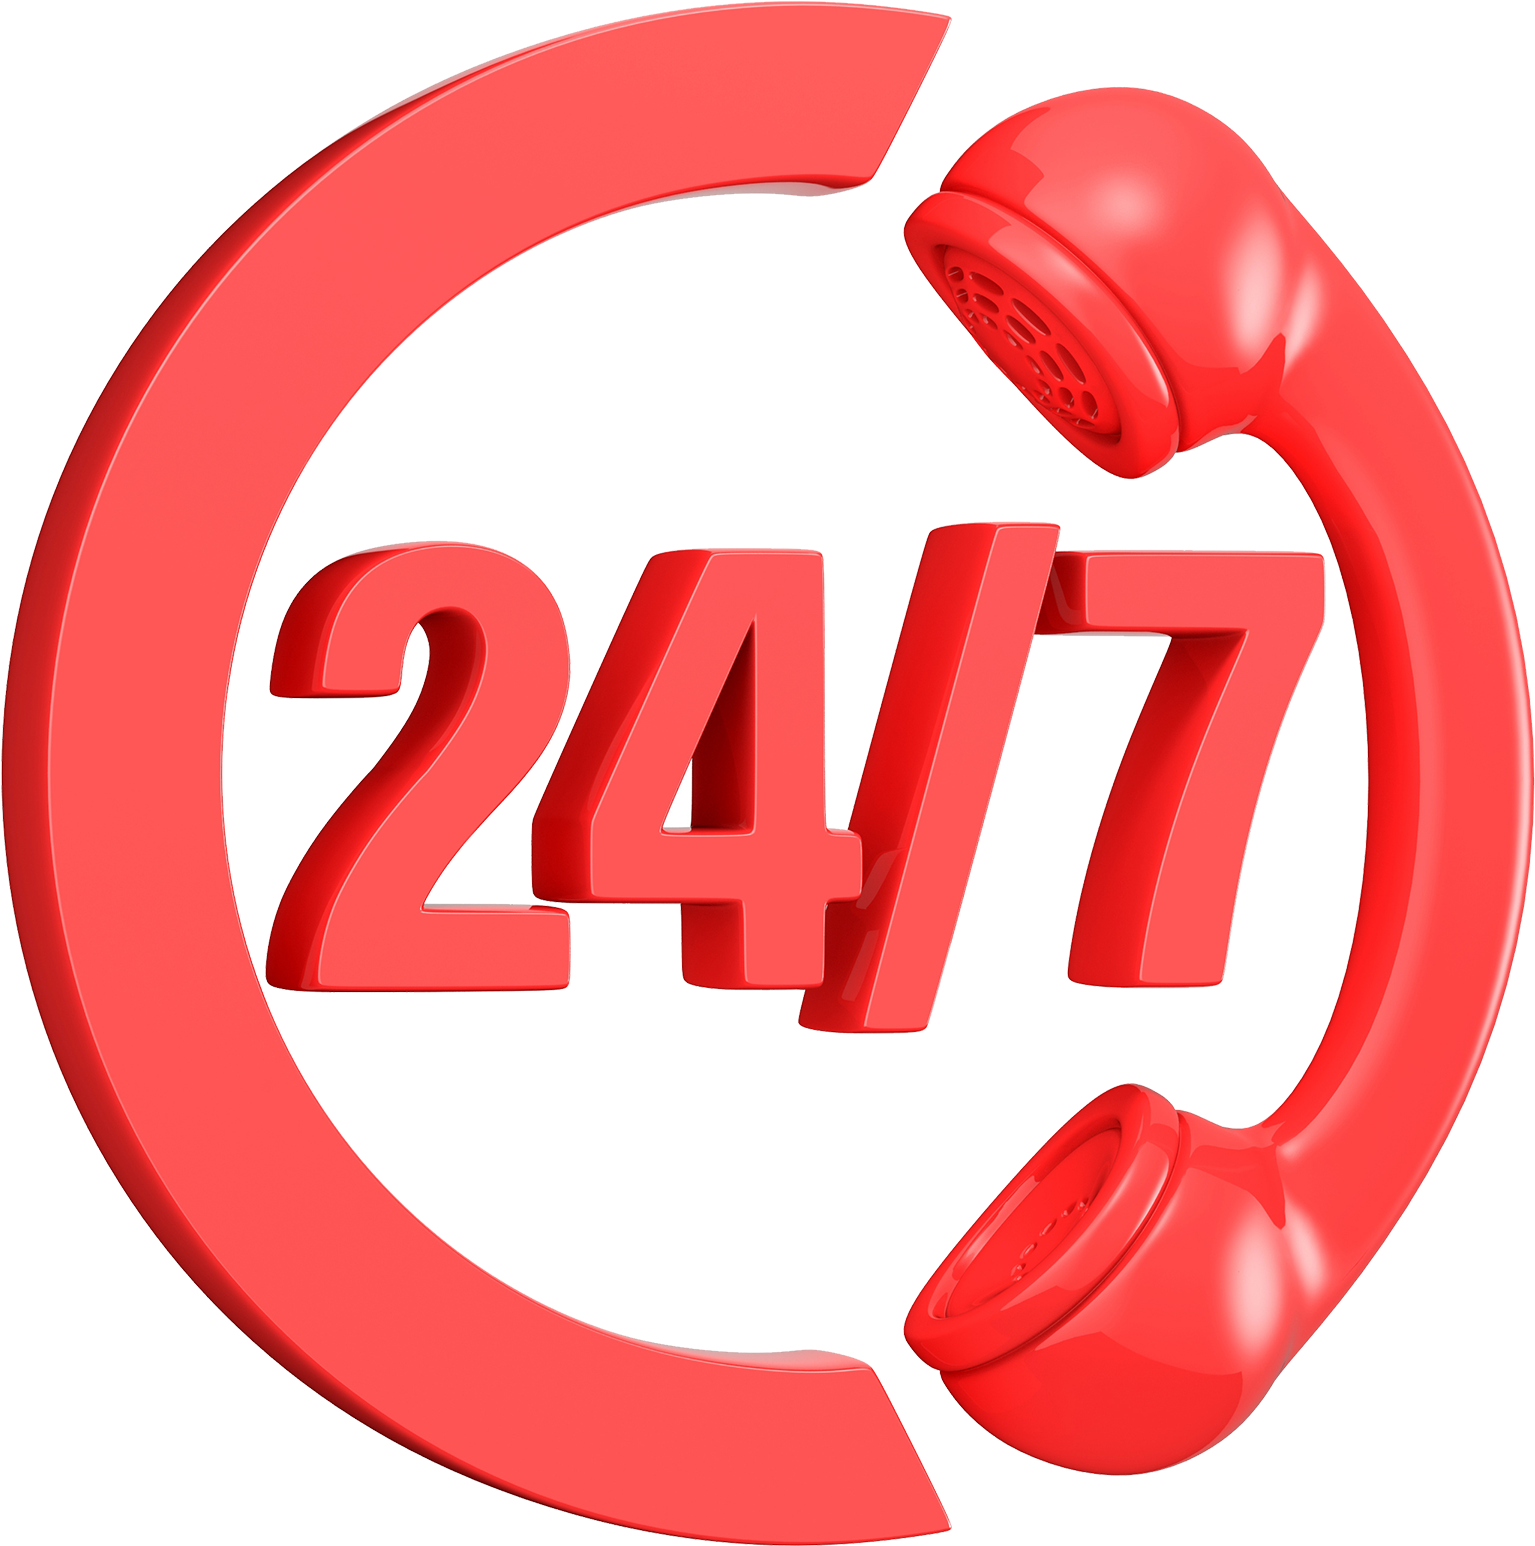 24/7 Emergency Service - Plumbing Services Transparent Clipart - Large Size  Png Image - PikPng